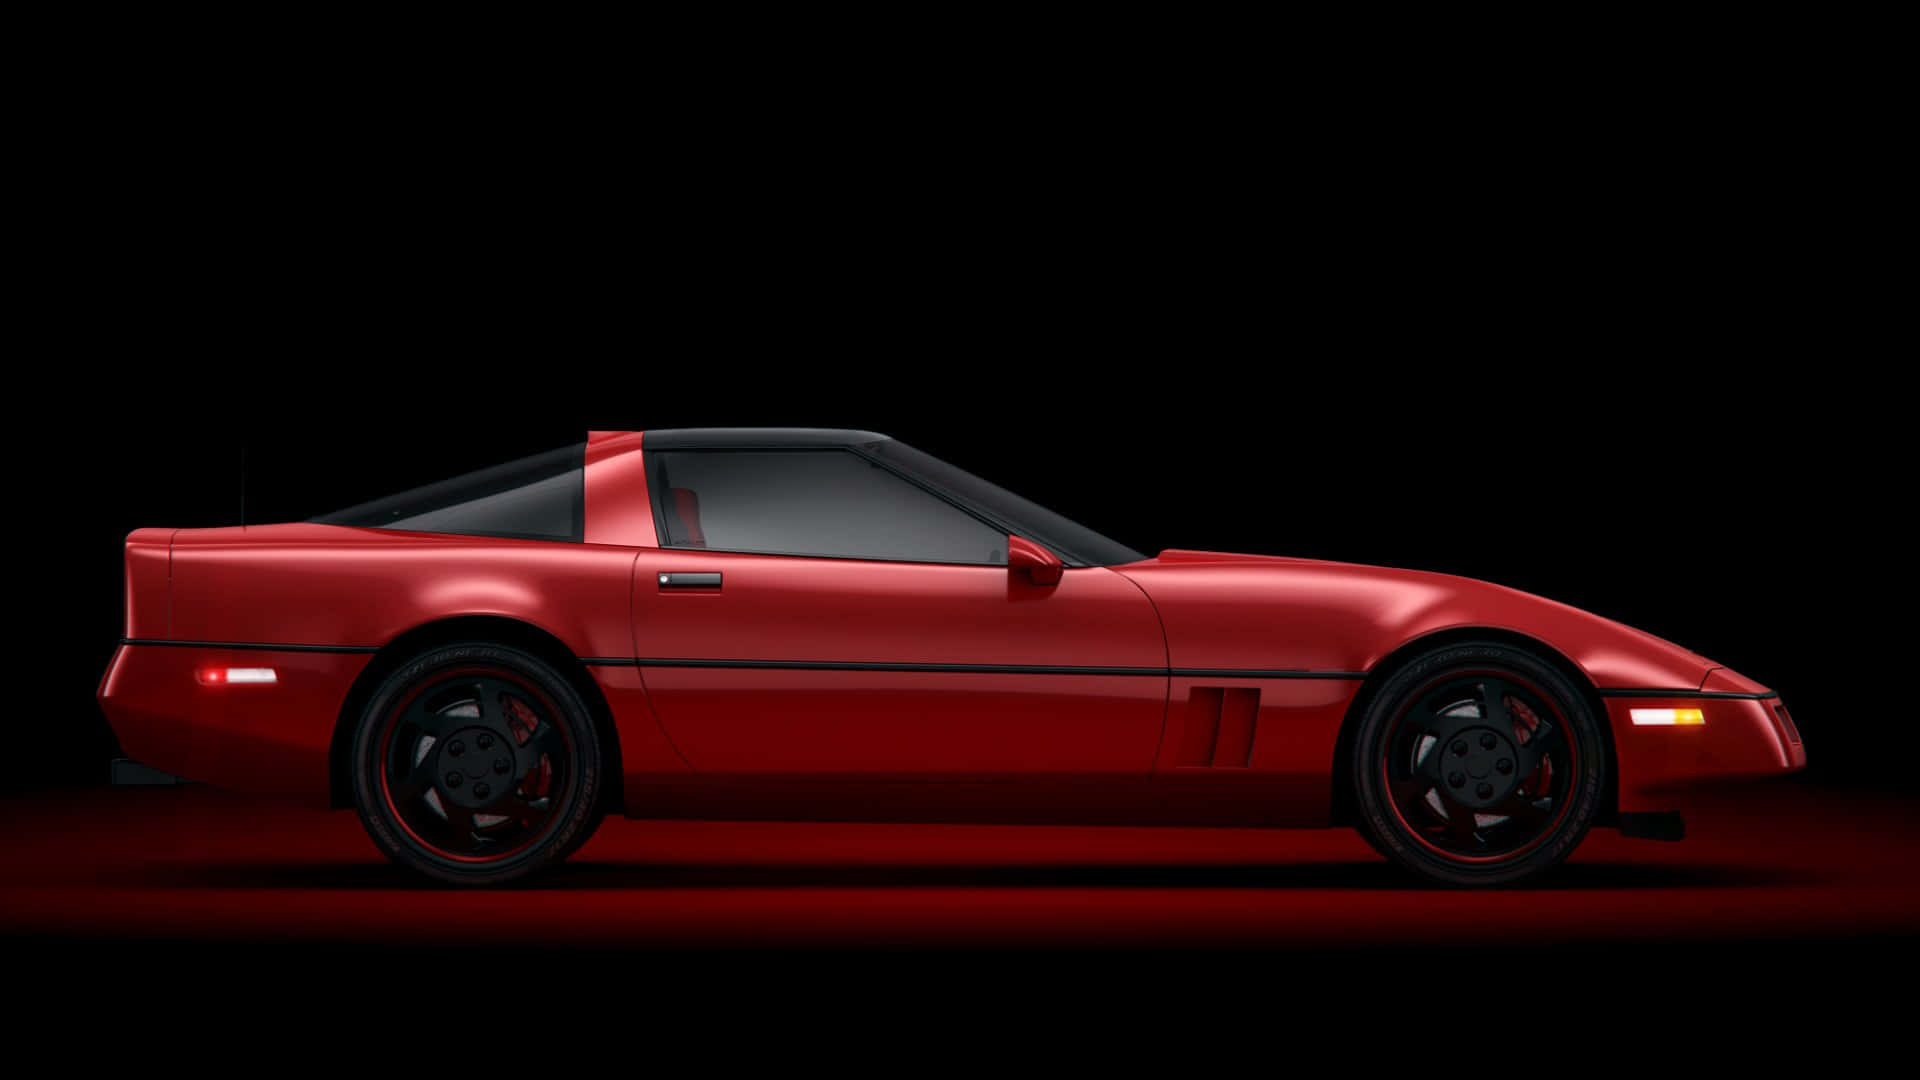 Cruise the city streets in style in the classic C4 Corvette.